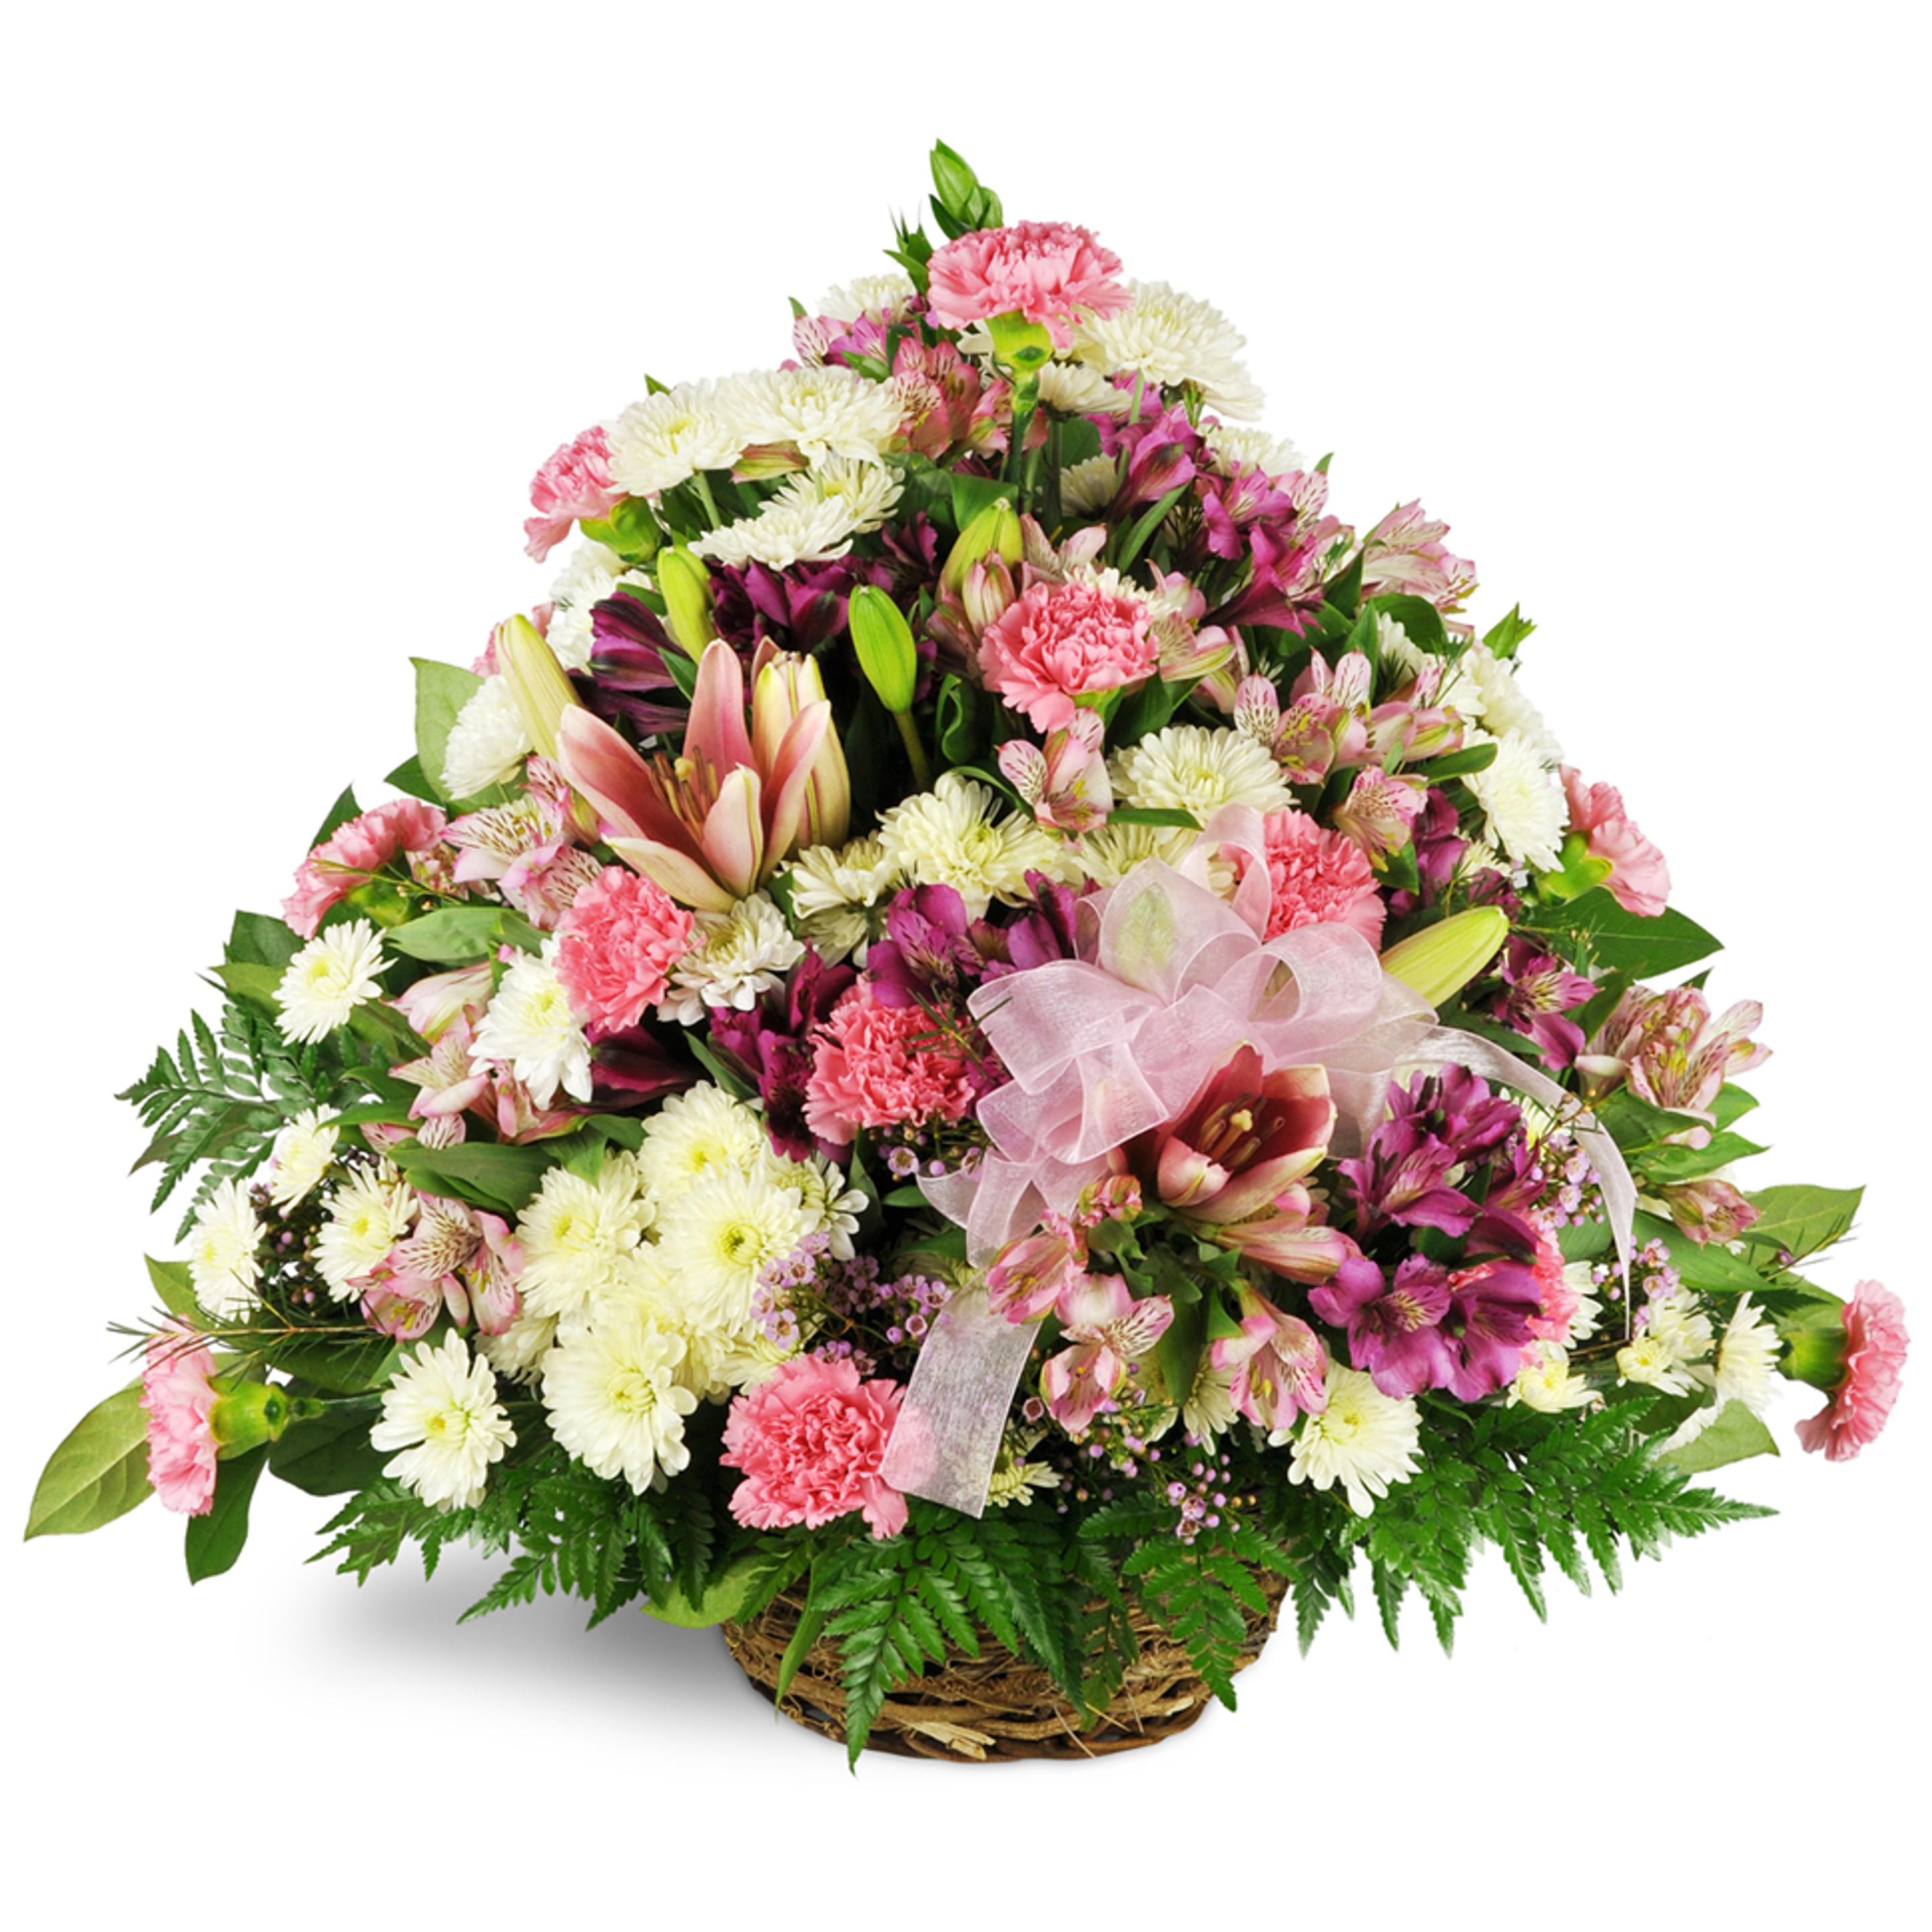 A beautiful gift basket bursting with flowers to express condolences for sympathy.